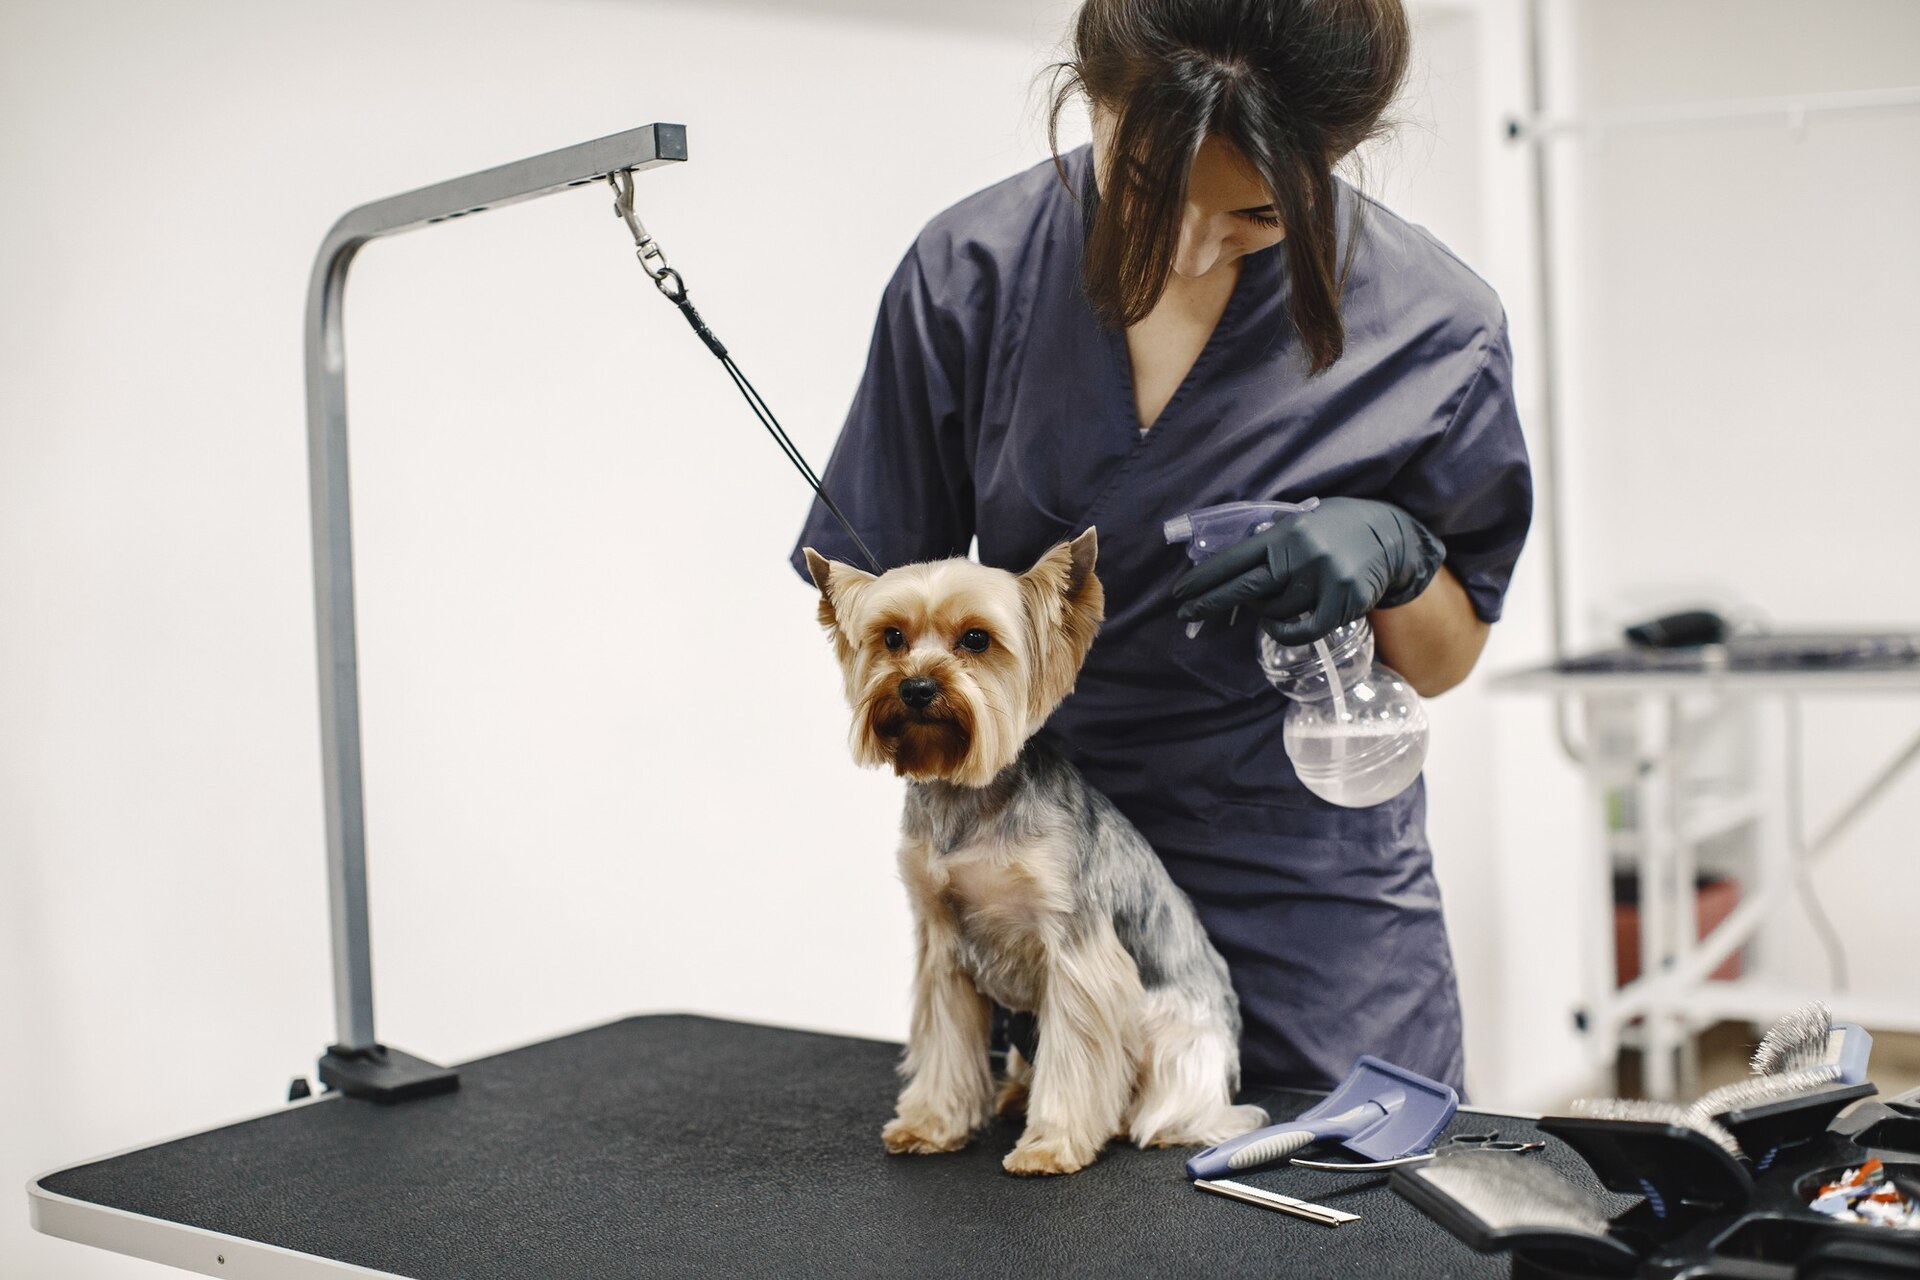 Top Dog Grooming Services